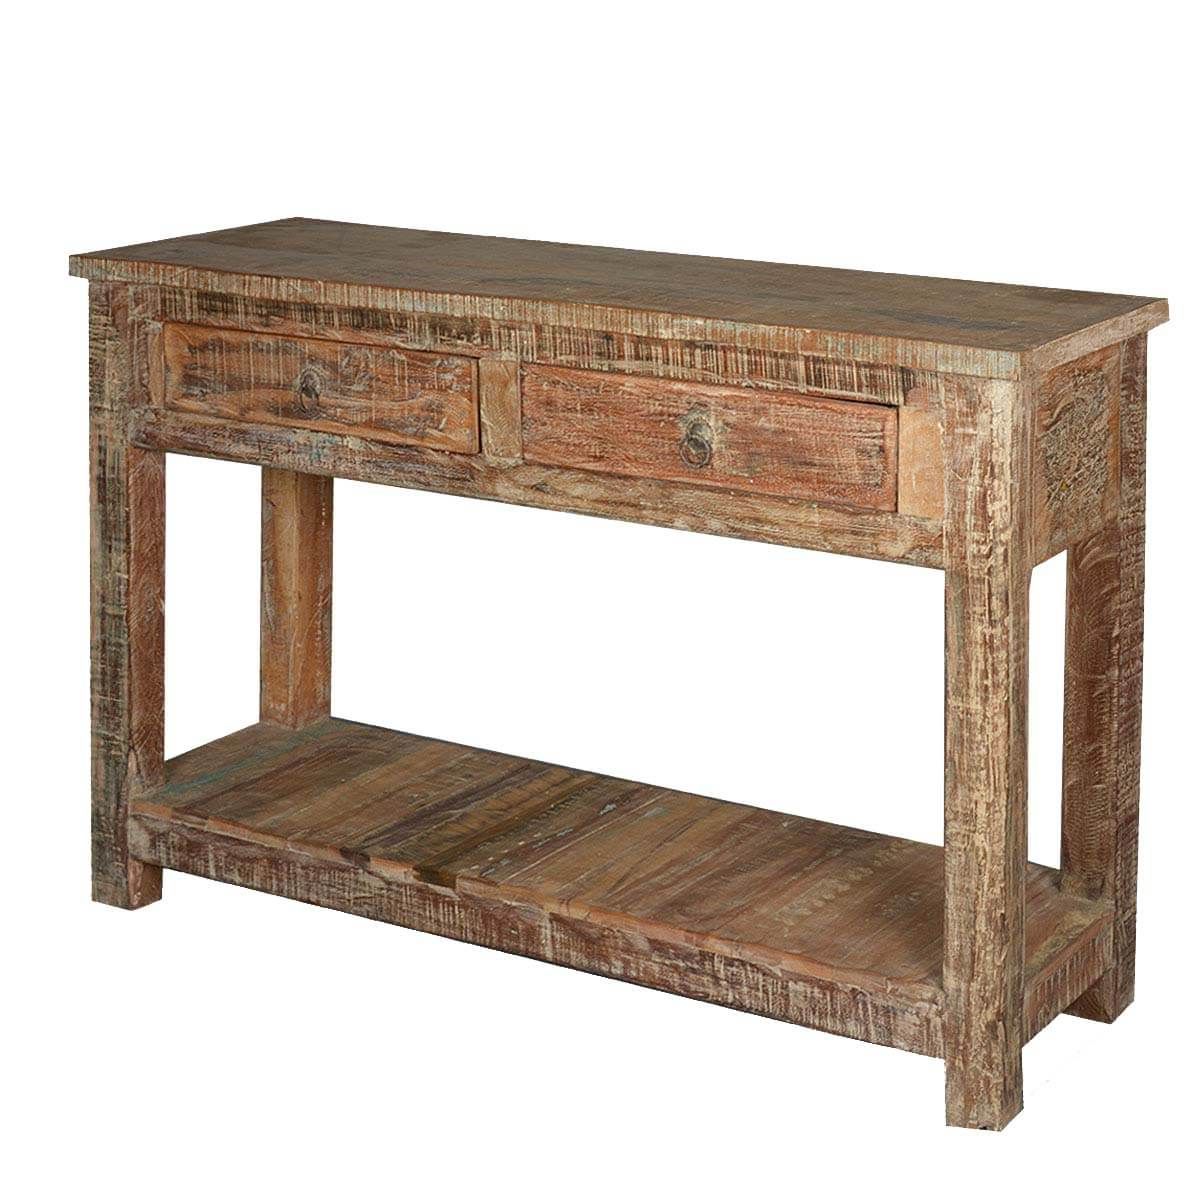 Rustic Reclaimed Wood Naturally Distressed Hall Console Table Throughout Most Up To Date Rustic Espresso Wood Console Tables (View 7 of 10)